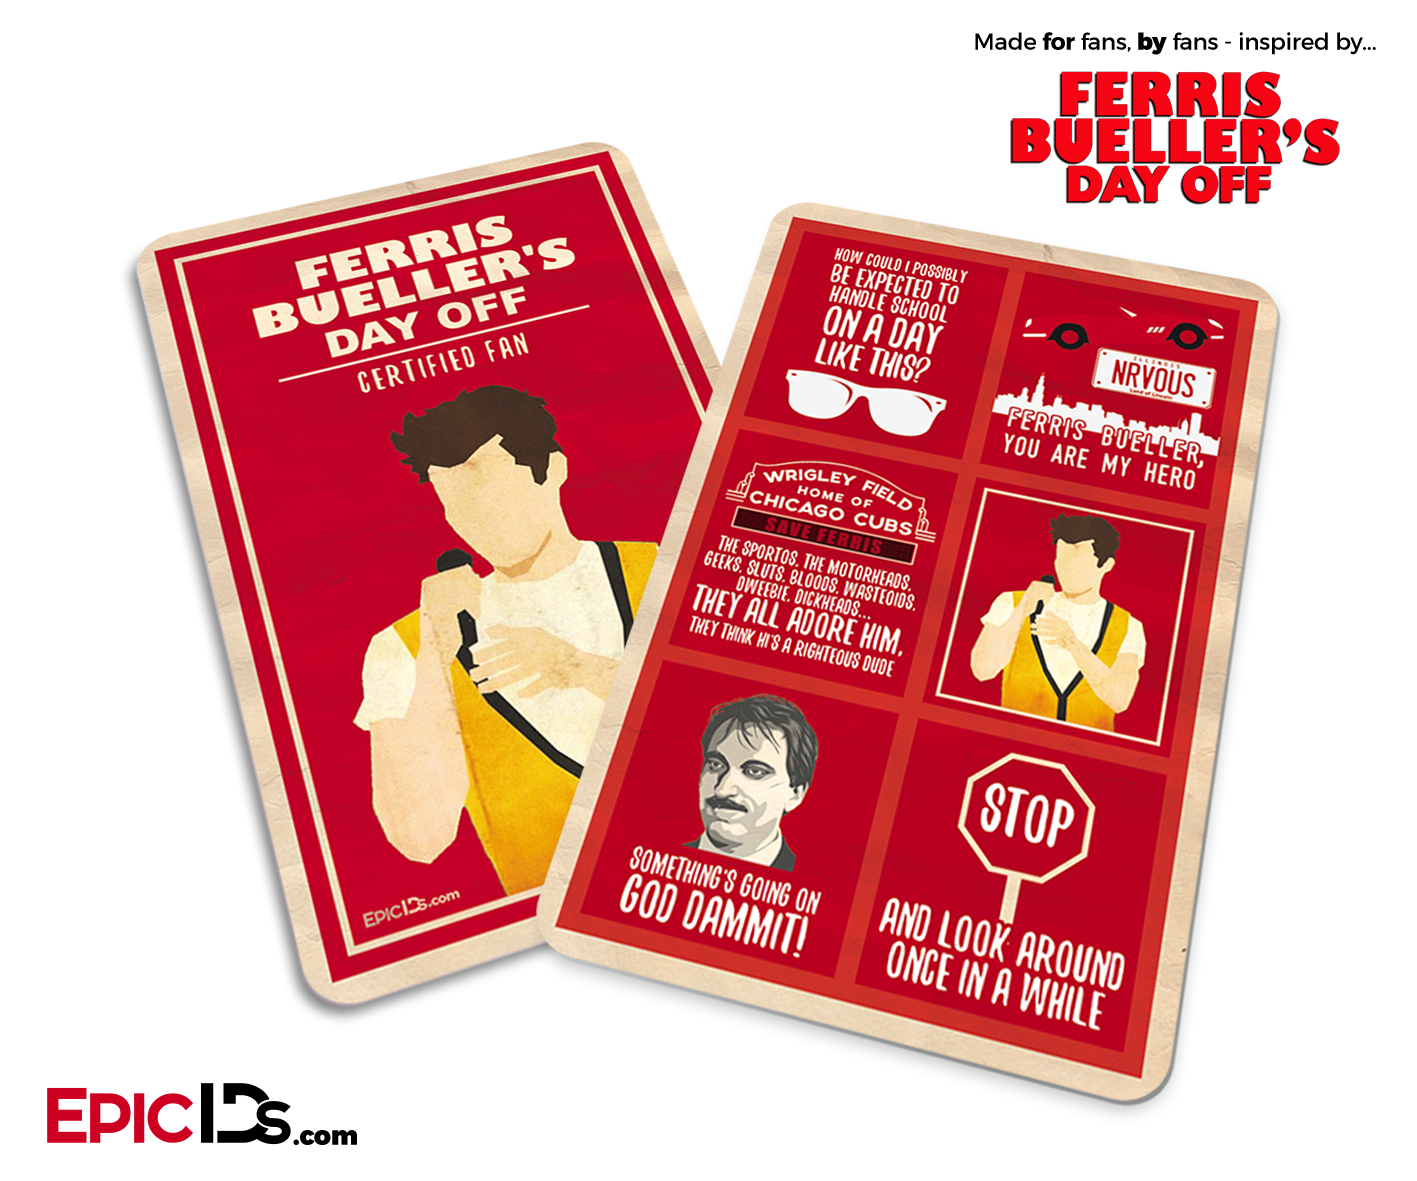 Ferris Bueller's Day Off Inspired Fan Card - 30th Anniversary Red Card Edition